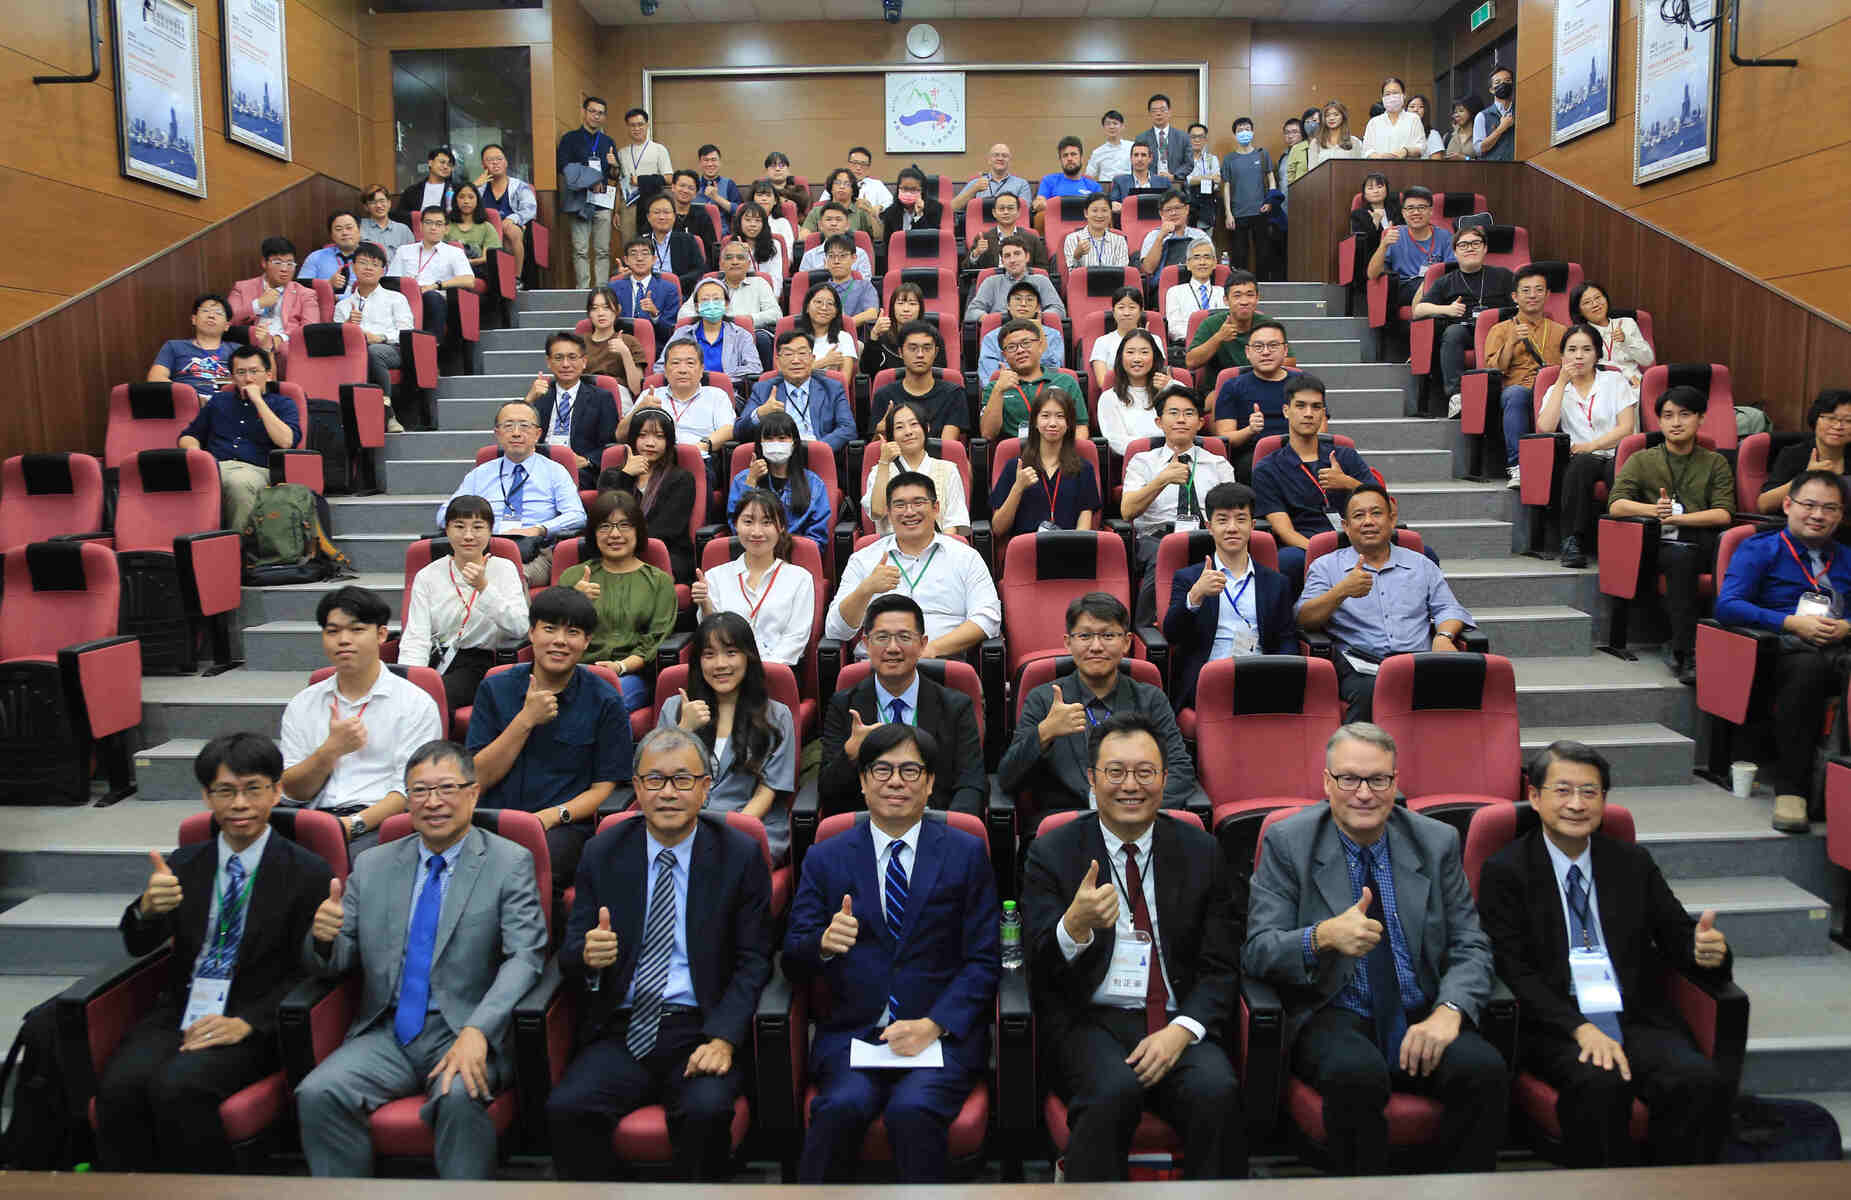 The Institute of Political Science at National Sun Yat-sen University (NSYSU) and the Taiwanese Political Science Association (TPSA) held the 2023 Annual Conference of TPSA with the theme of "The Impact of the International Order and the Challenges of Democratic Politics." More than 200 political scientists and graduate students from Taiwan, South Korea, Japan, the United States, the Philippines, Indonesia, Vietnam, and Hong Kong gathered in Sizihwan, and Kaohsiung Mayor Chi-mai Chen (the middle of the front row) was invited to attend.